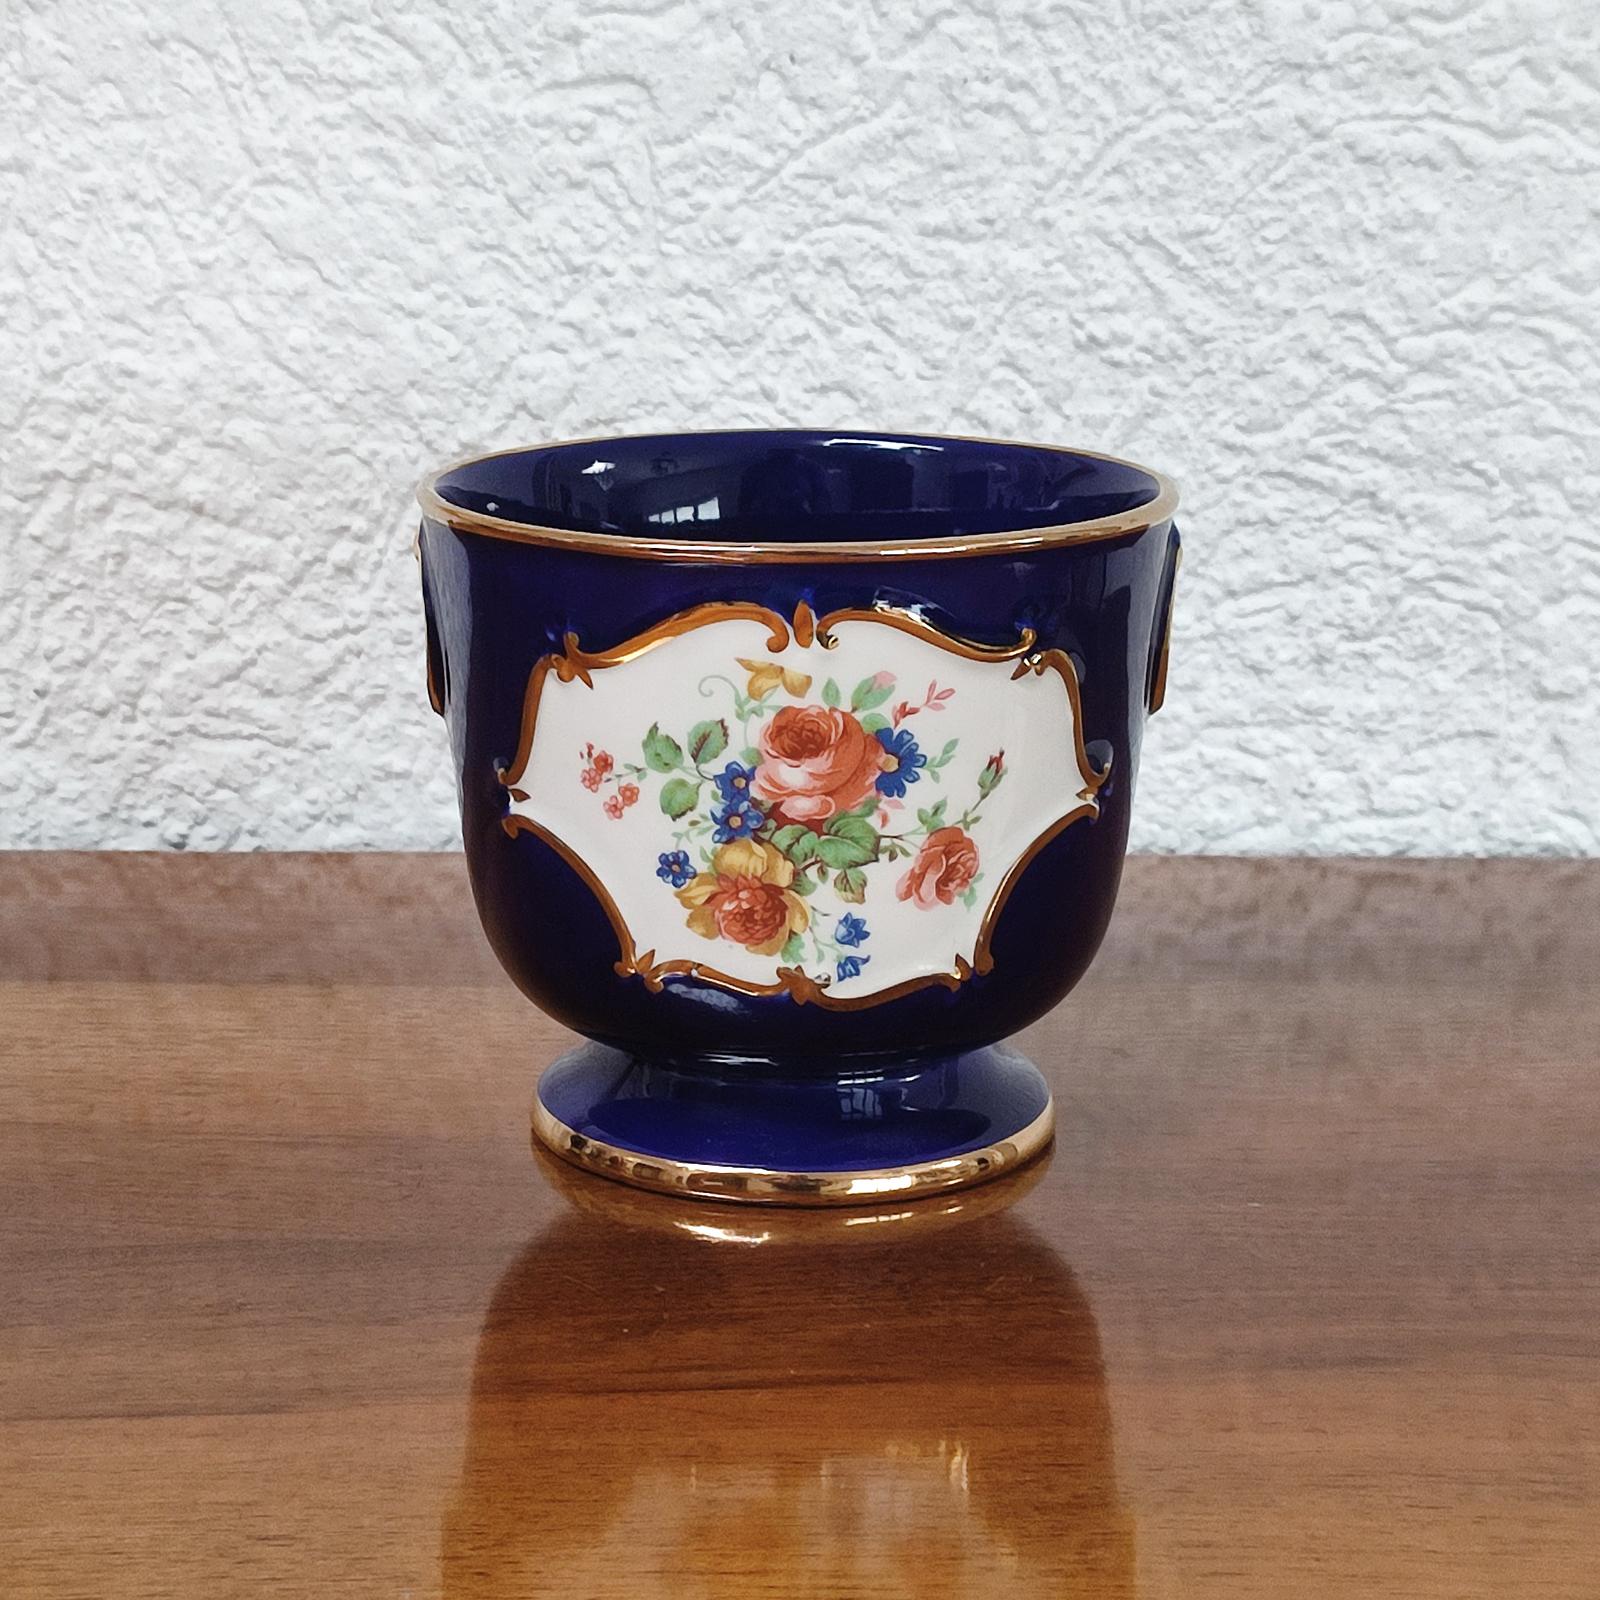 Beautiful Italian porcelain cachepot, flowers décor in white medallion, against cobalt blue background, gold detailing. Signed. Very good condition.
Dimensions: height 15 cm (5.90 cm), diameter 13 cm (5.11 in).